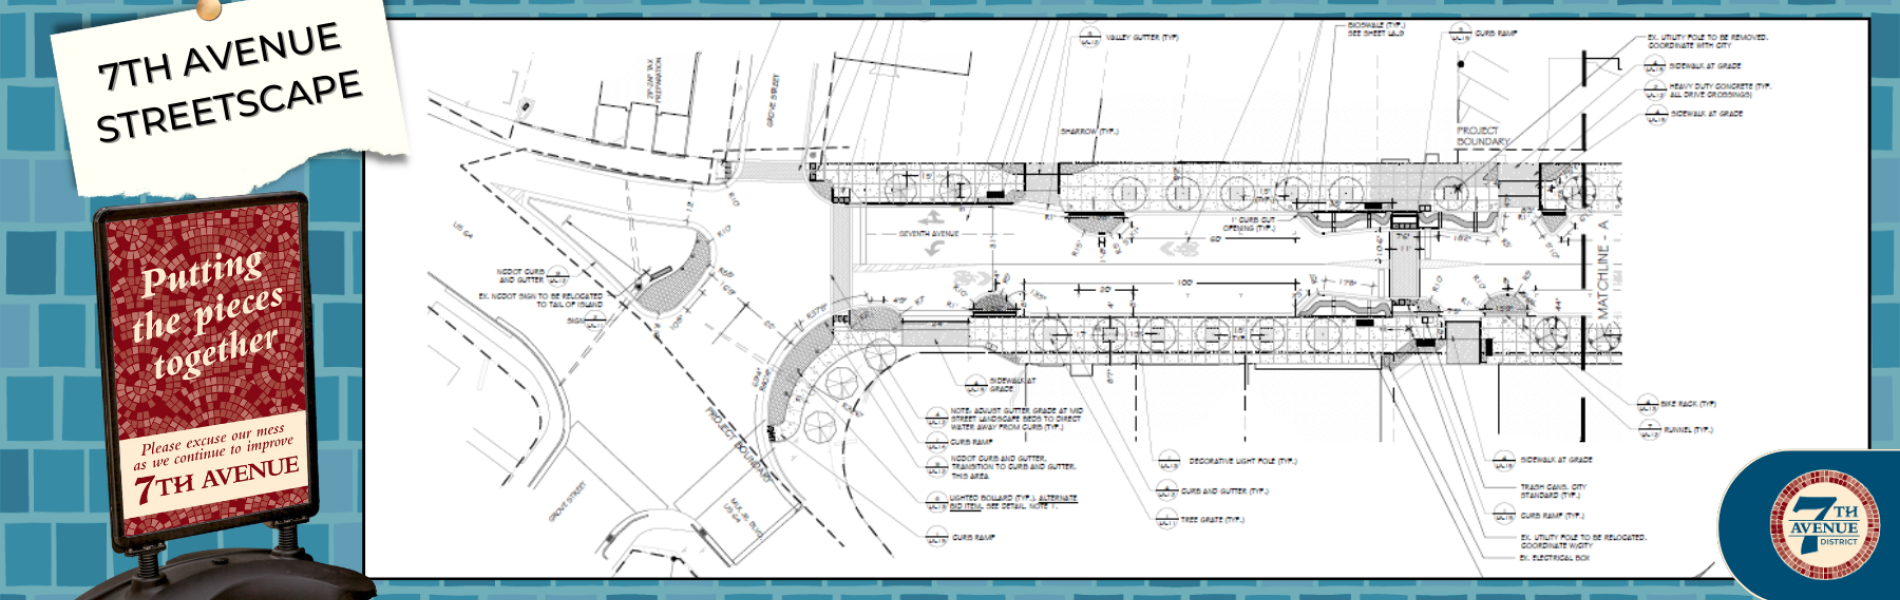 image of the 7th avenue streetscape site plan